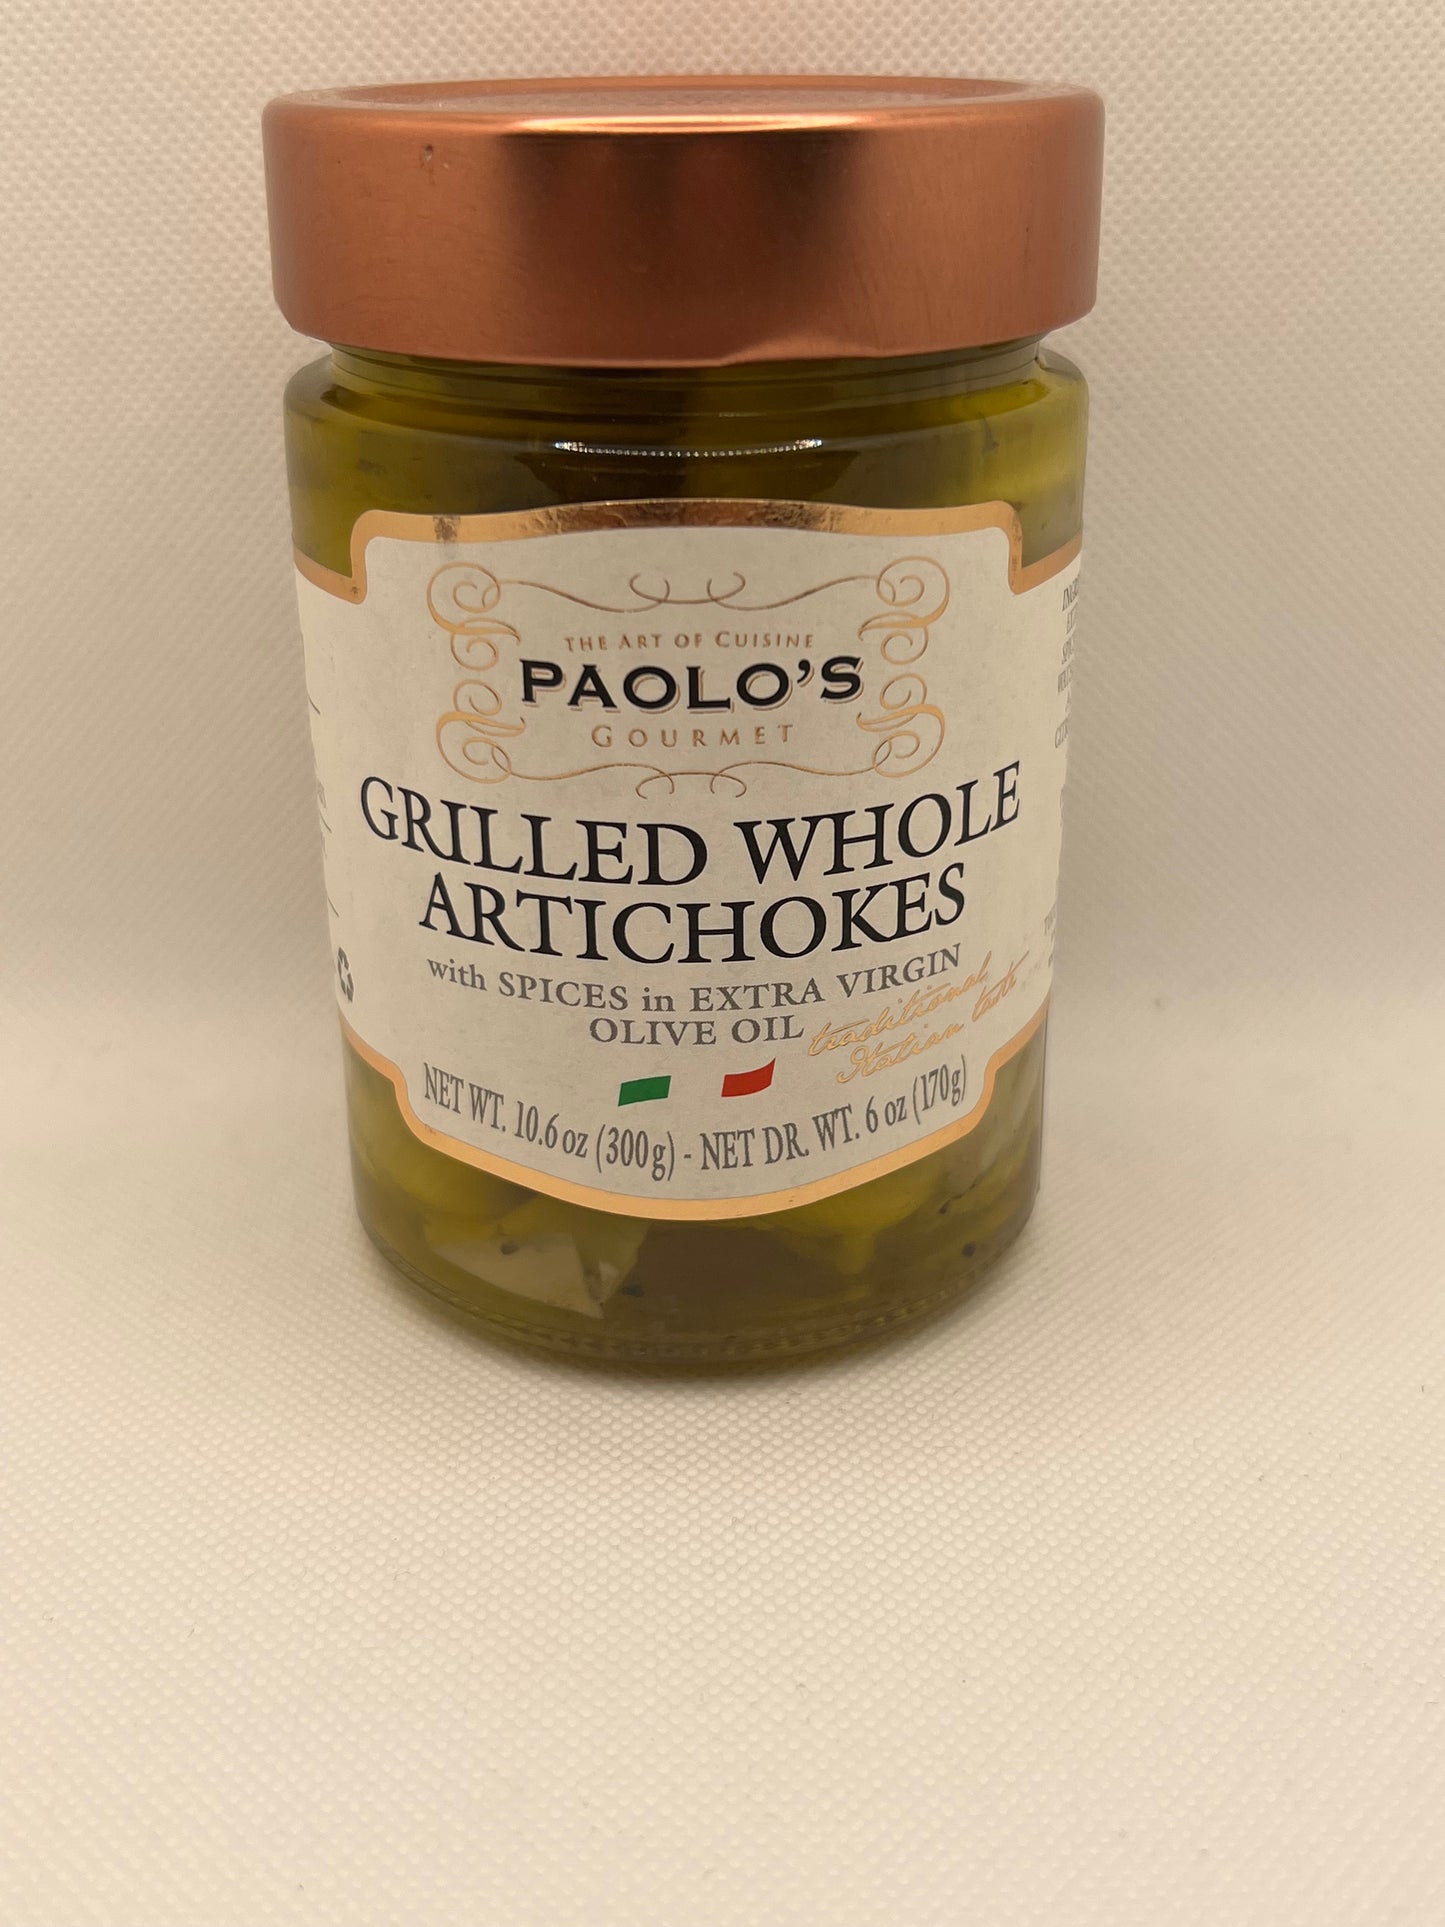 Grilled Whole Artichokes